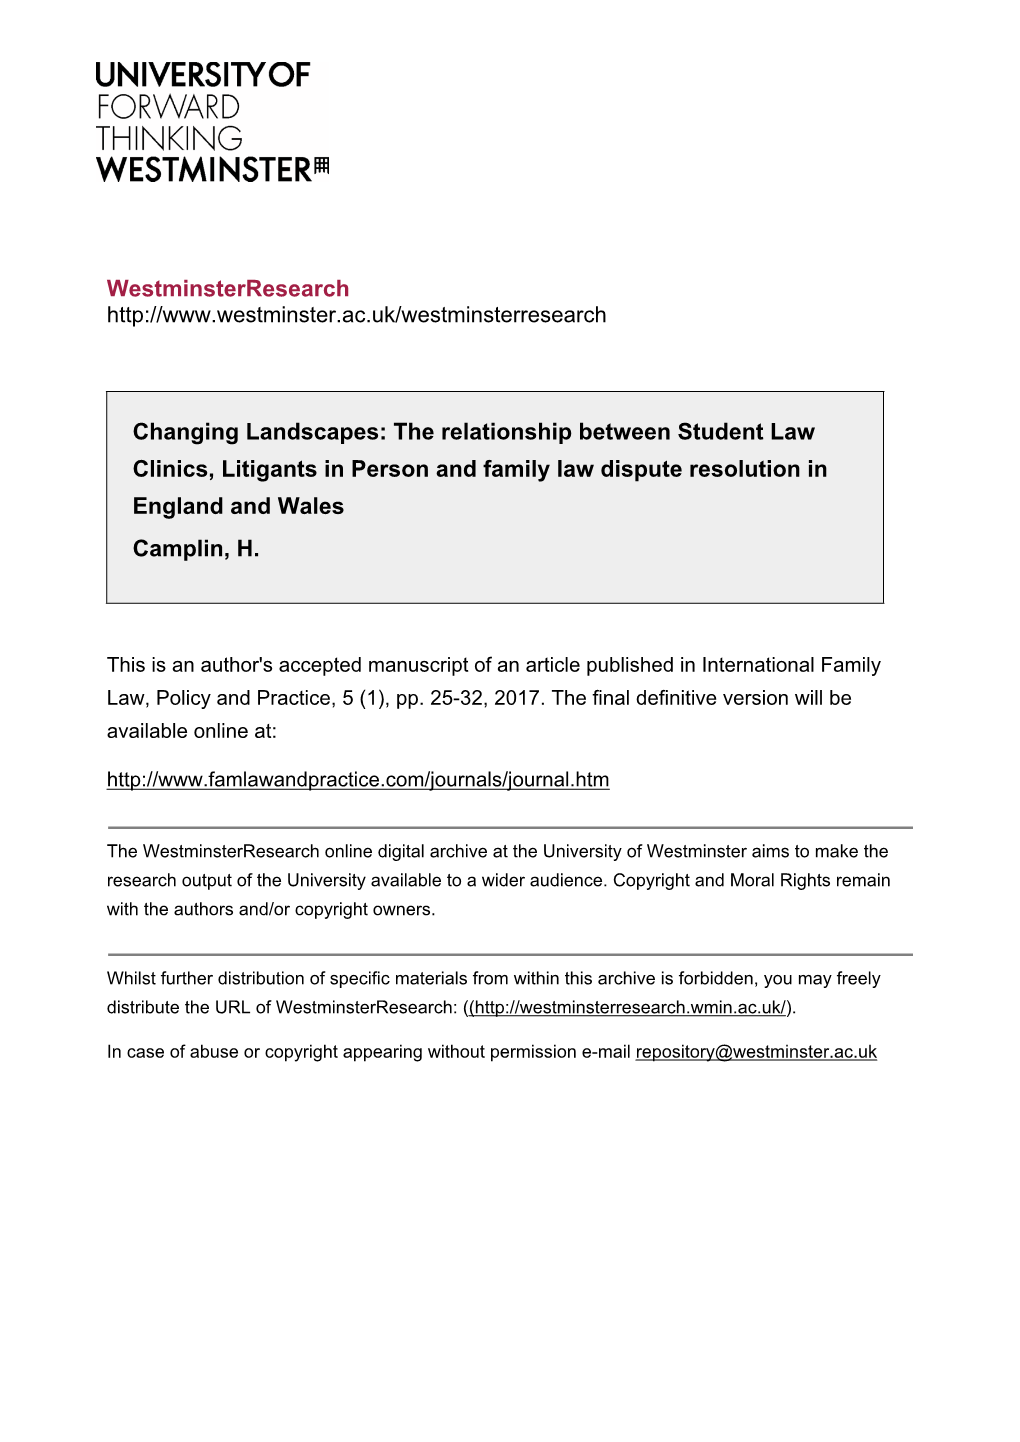 The Relationship Between Student Law Clinics, Litigants in Person and Family Law Dispute Resolution in England and Wales Camplin, H